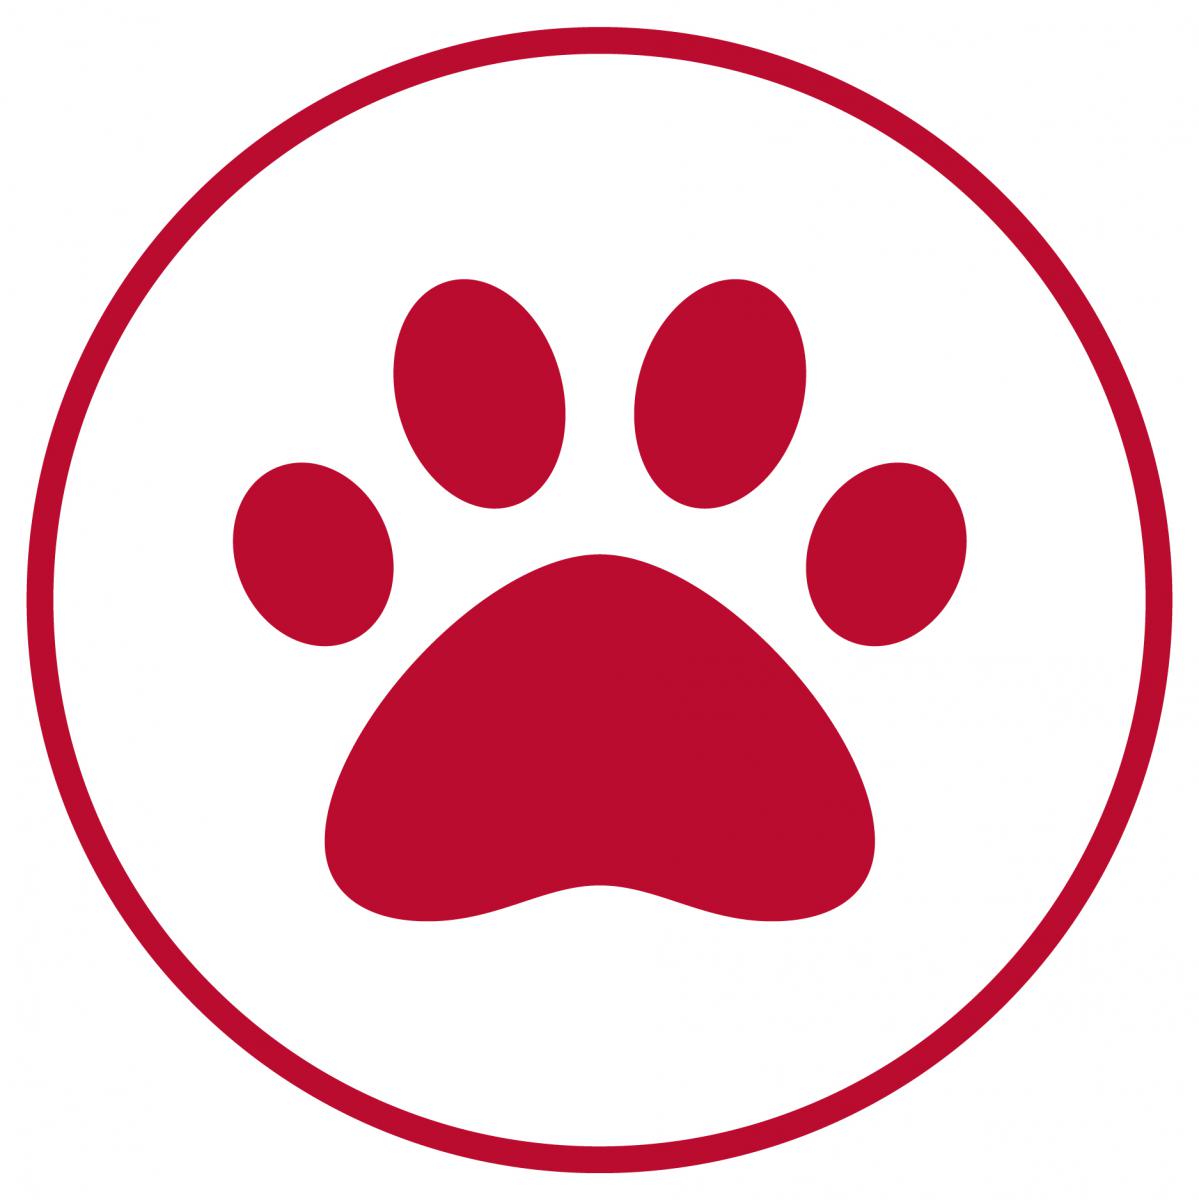 An icon graphic of a red paw print surrounded by a red circle.